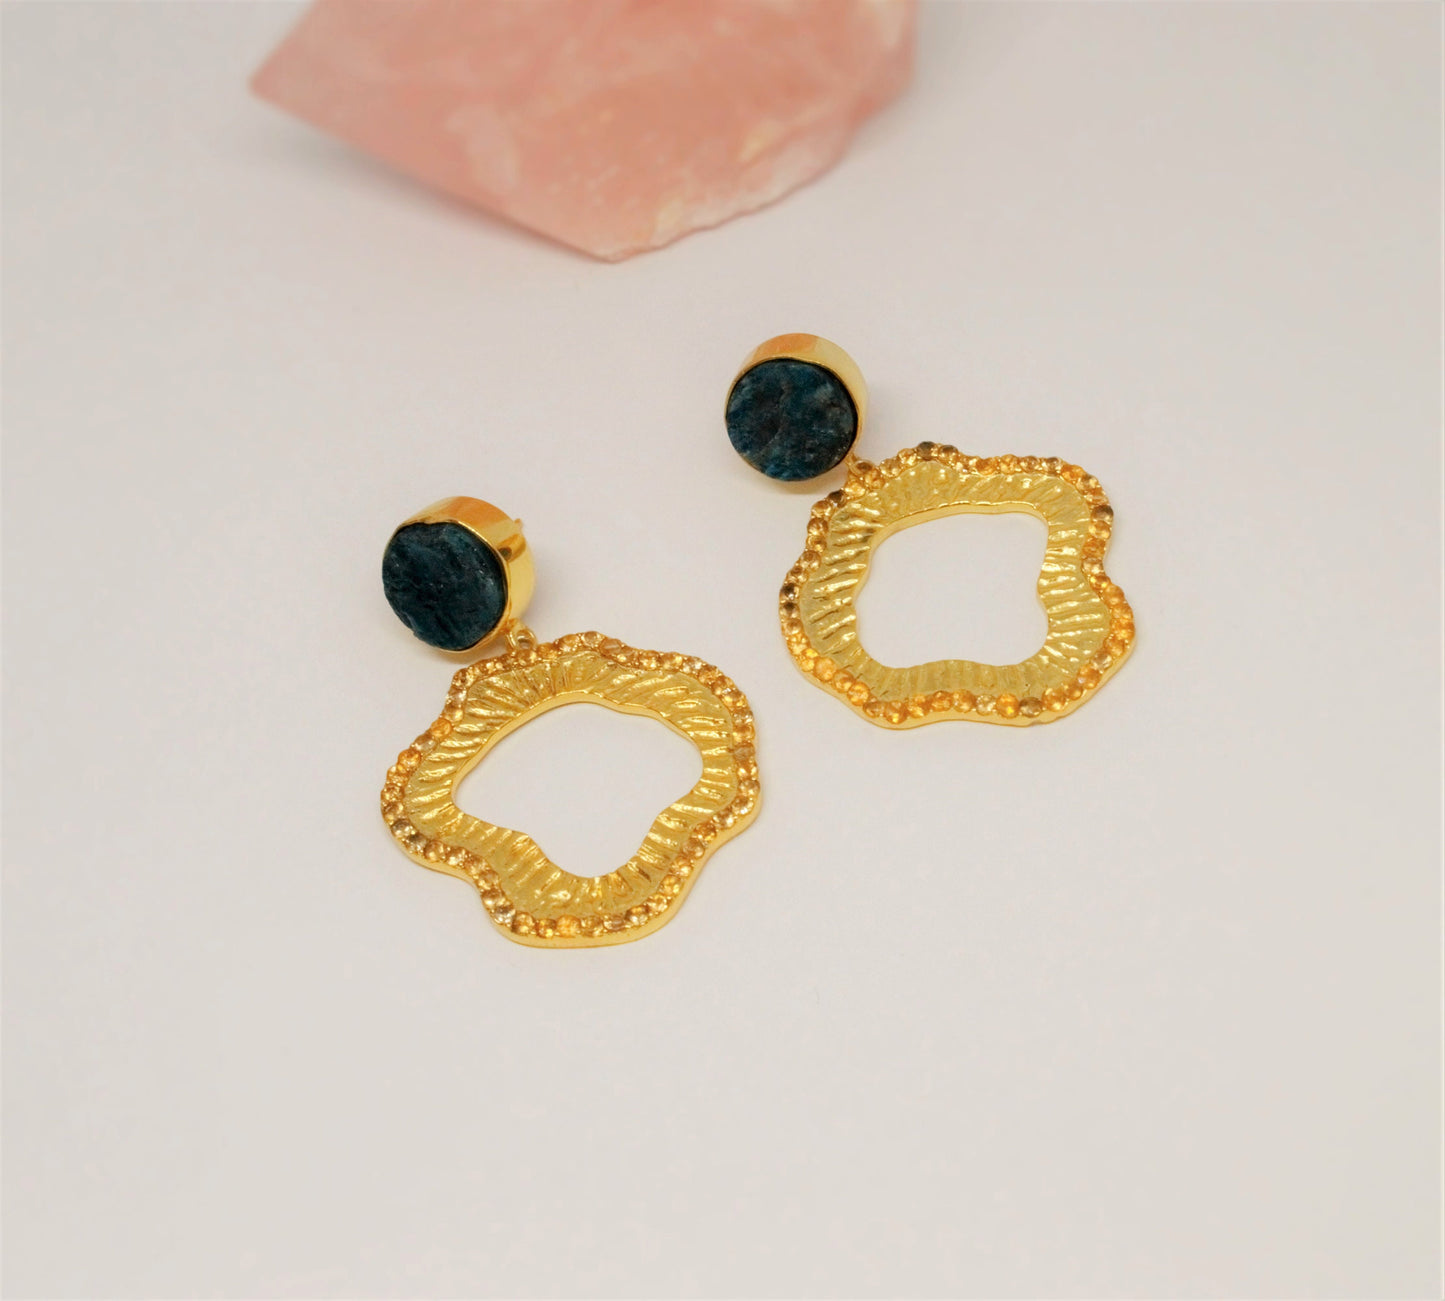 Blue Apatite, Citrine Gold Earrings, Unique November Birthstone, Handmade Statement Earrings, Bridesmaid Gift for her, Indian Jewelry